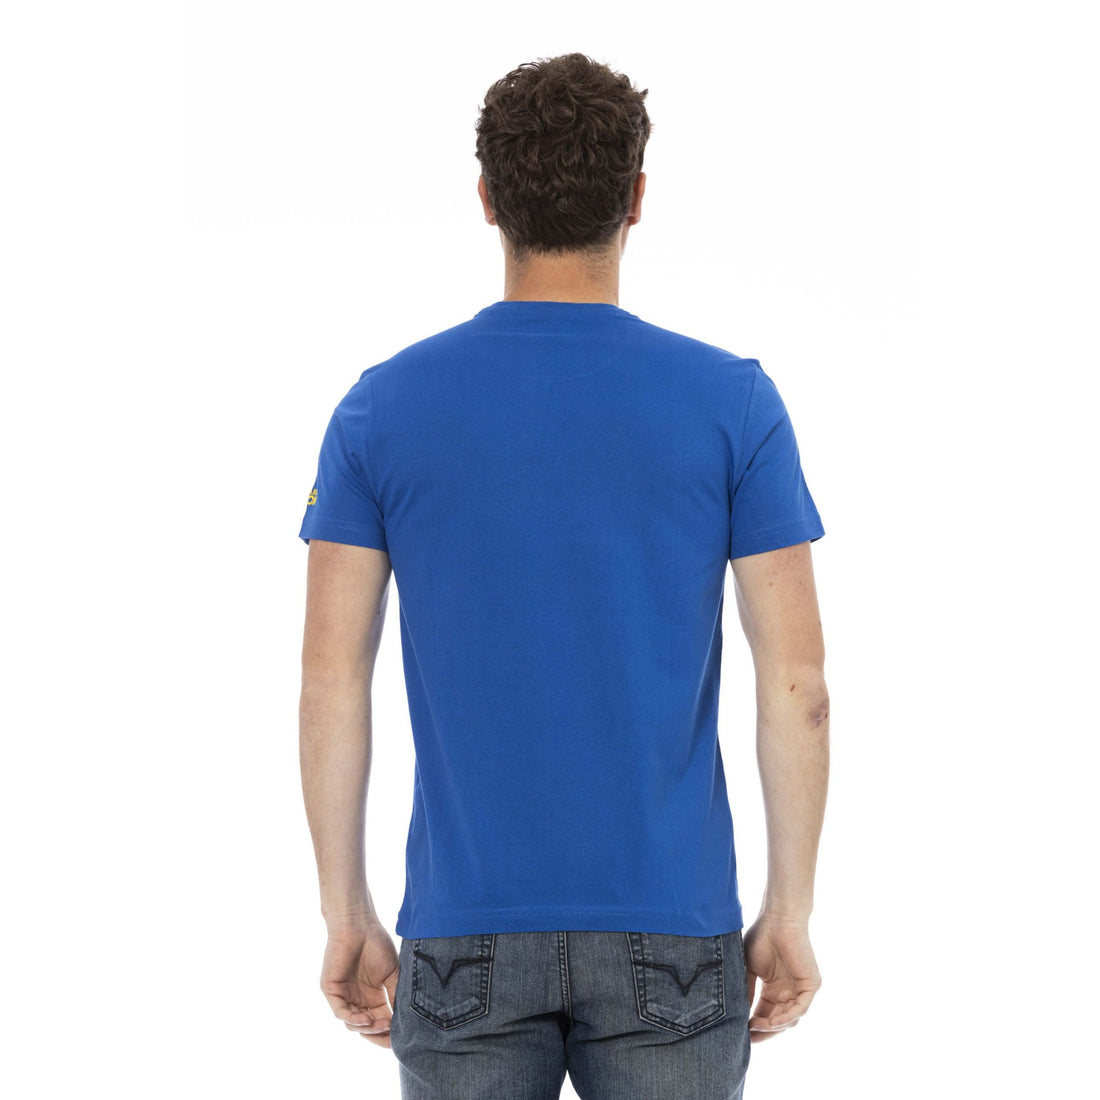 Trussardi Action Elegant Blue Tee with Front Print